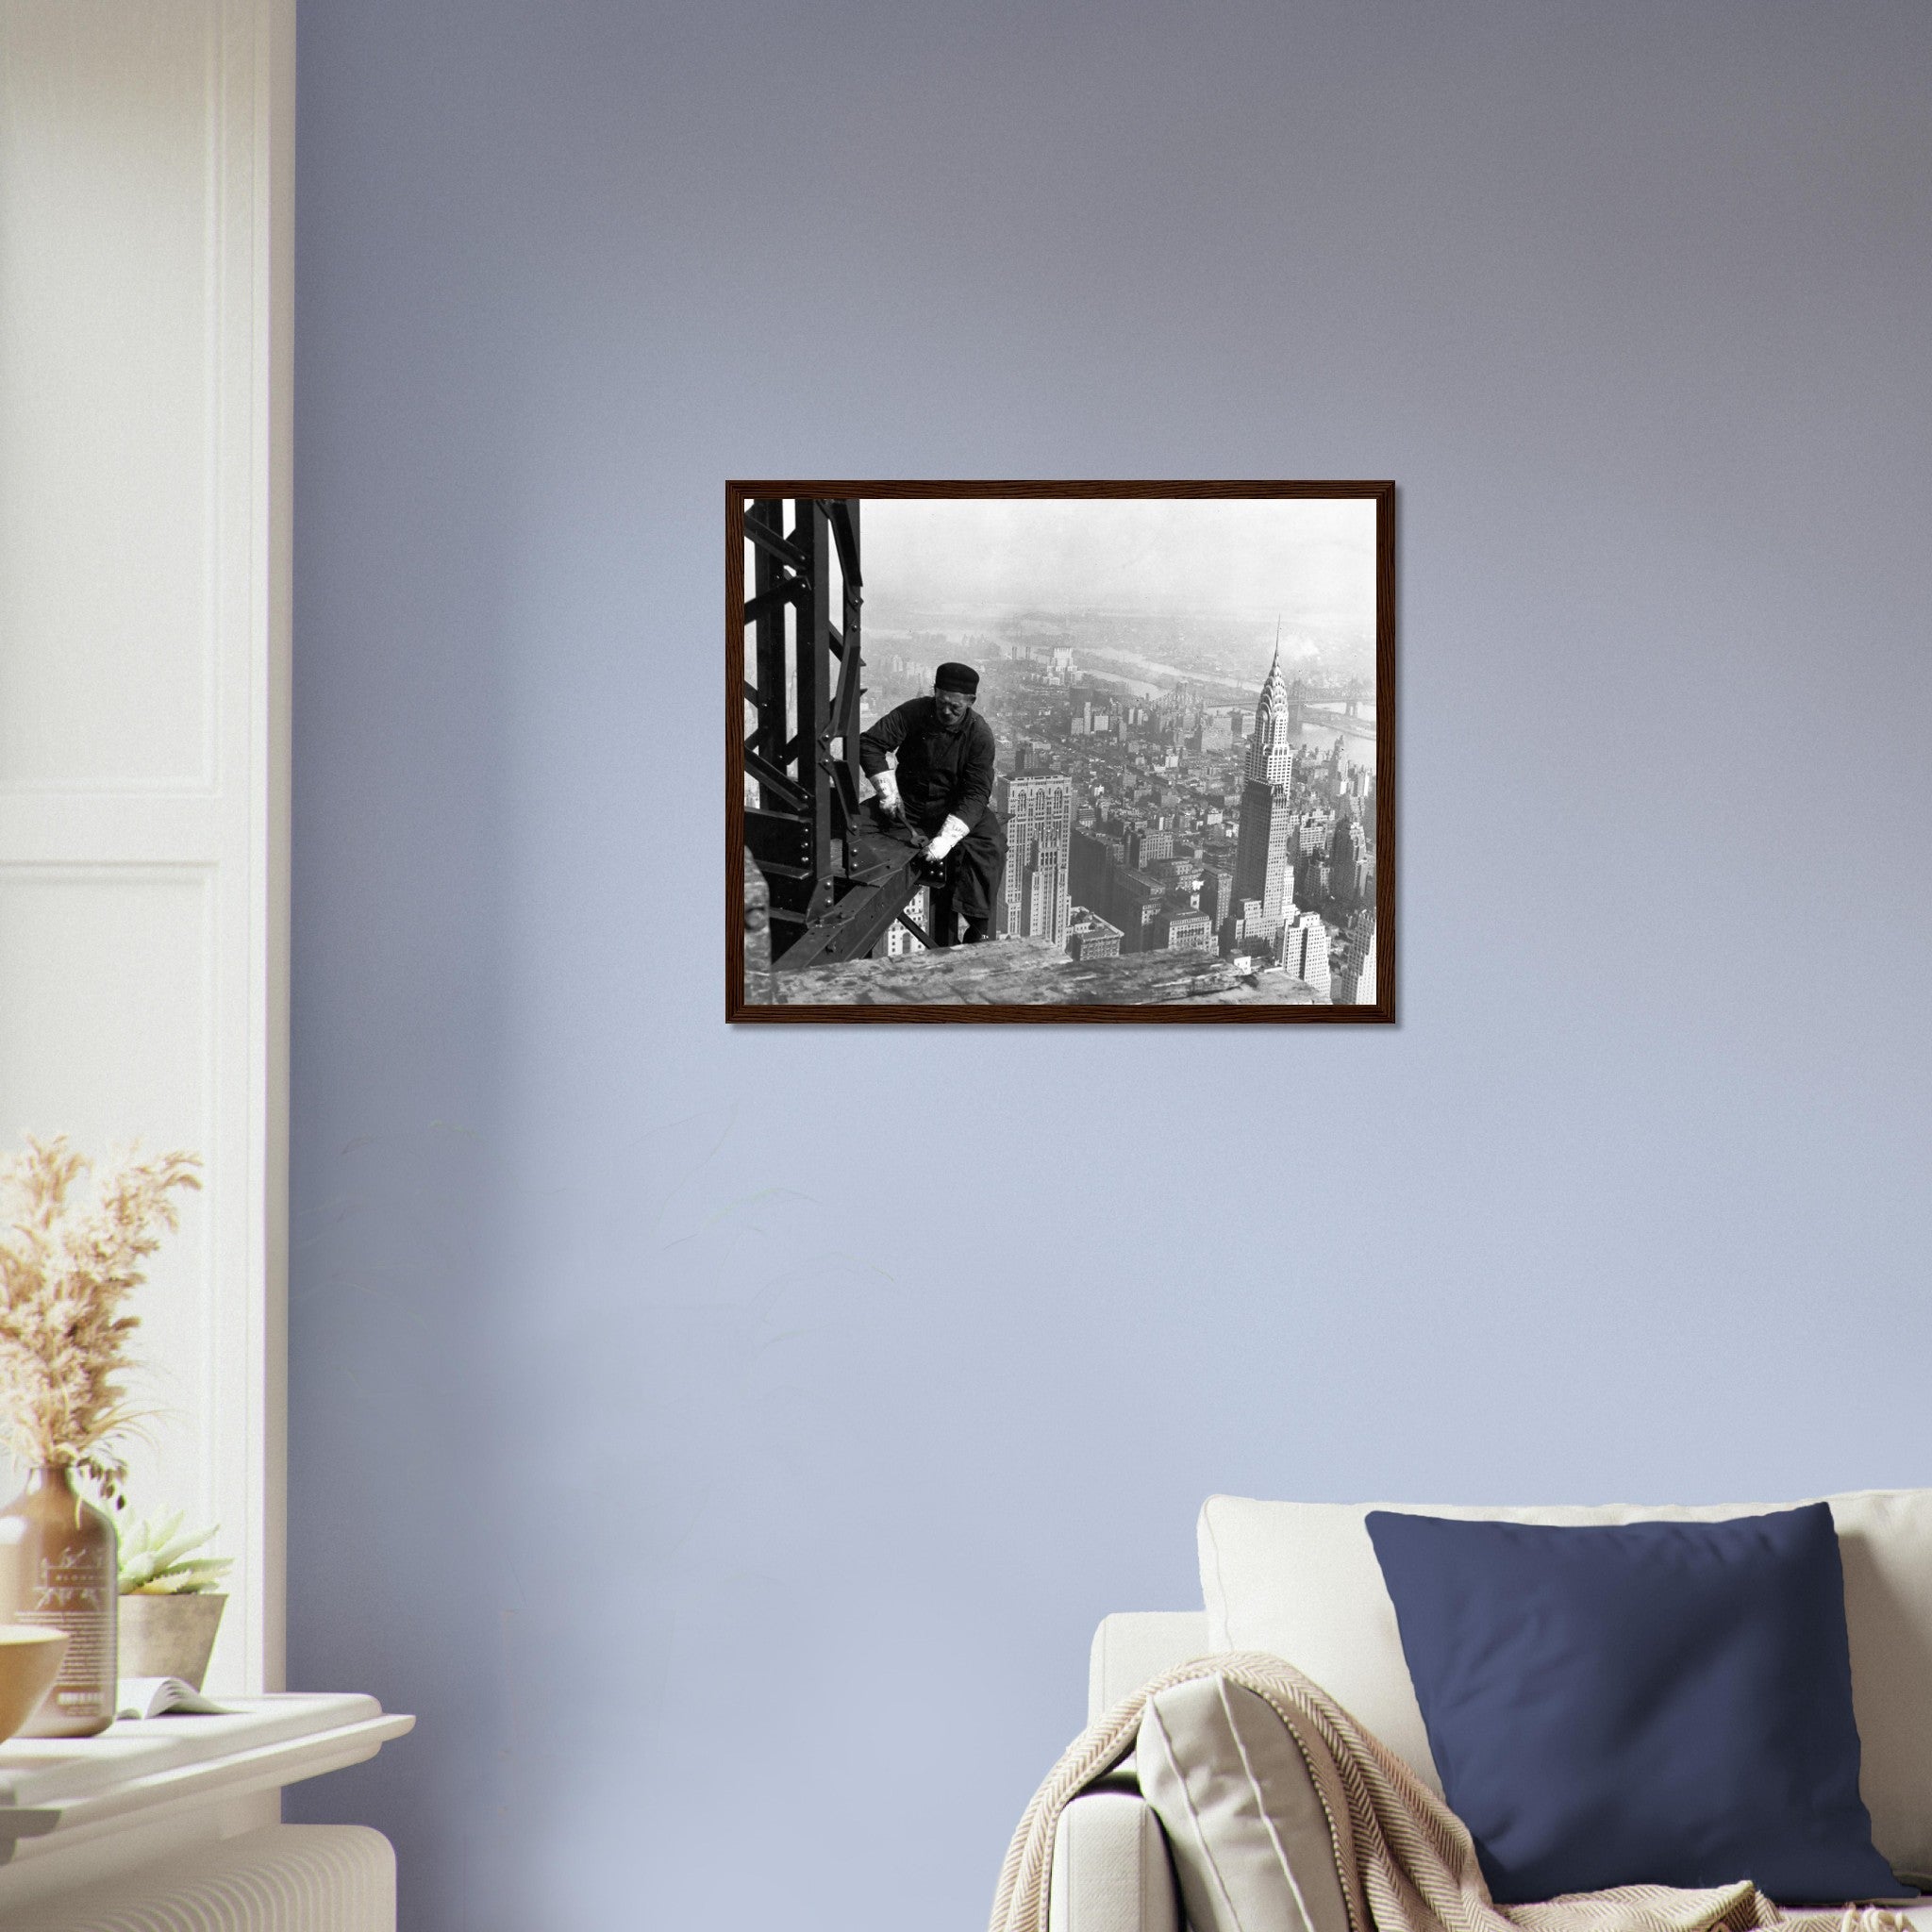 Empire State Worker Framed Print, Vintage Framed From 1930, Lewis Hine - Daring New York Construction Workers - WallArtPrints4U